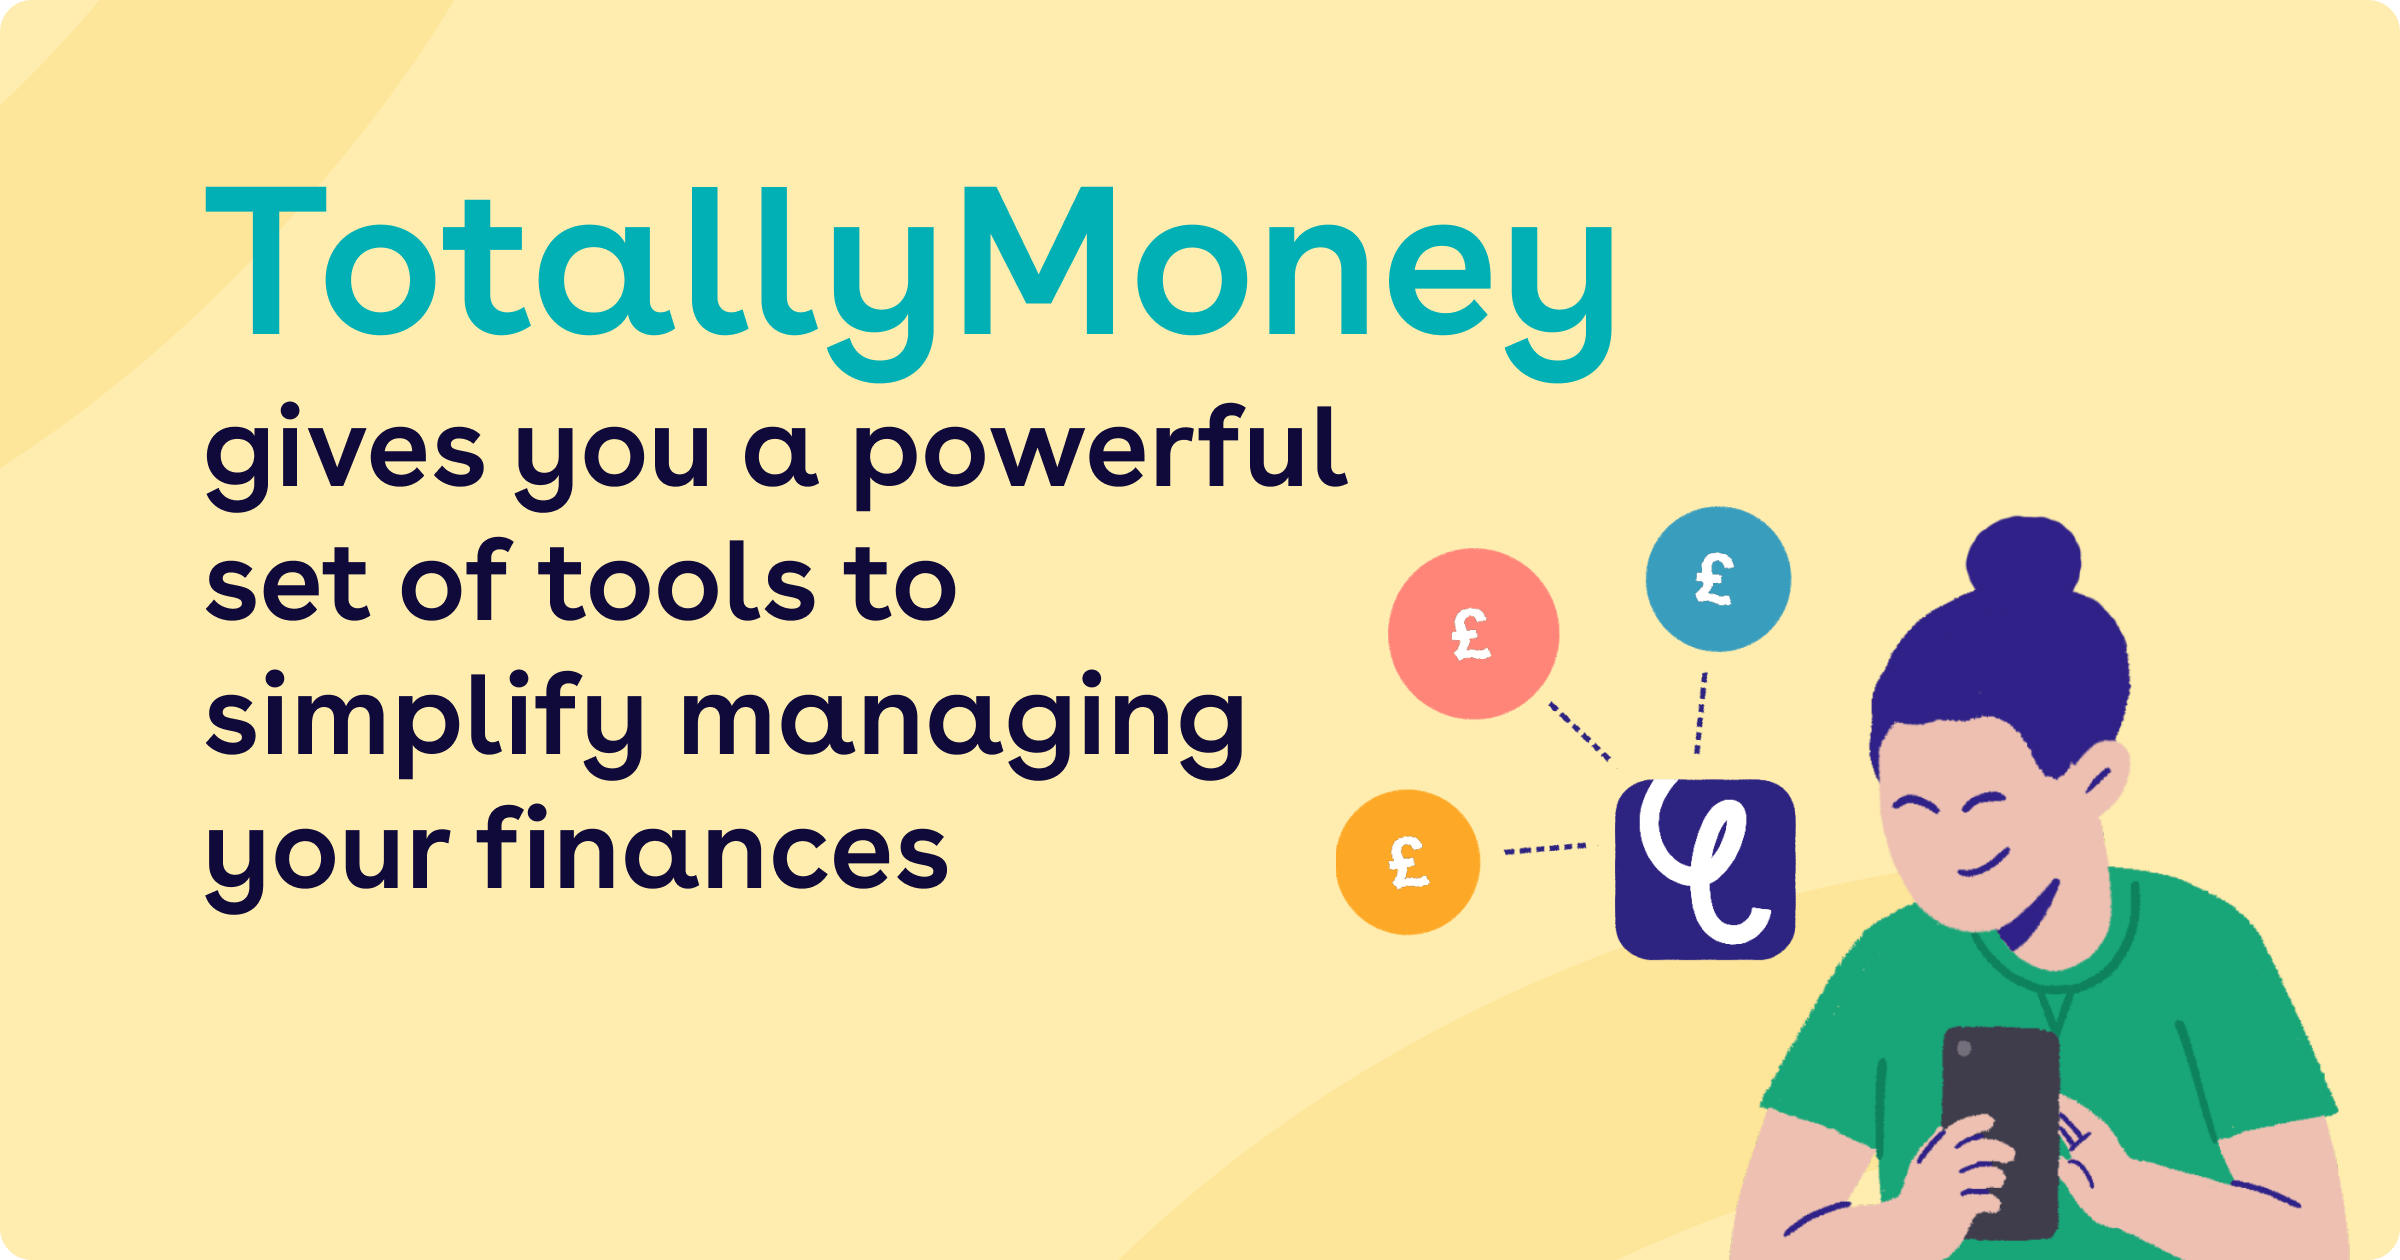 TotallyMoney gives you a powerful set of tools to simplify managing your finances